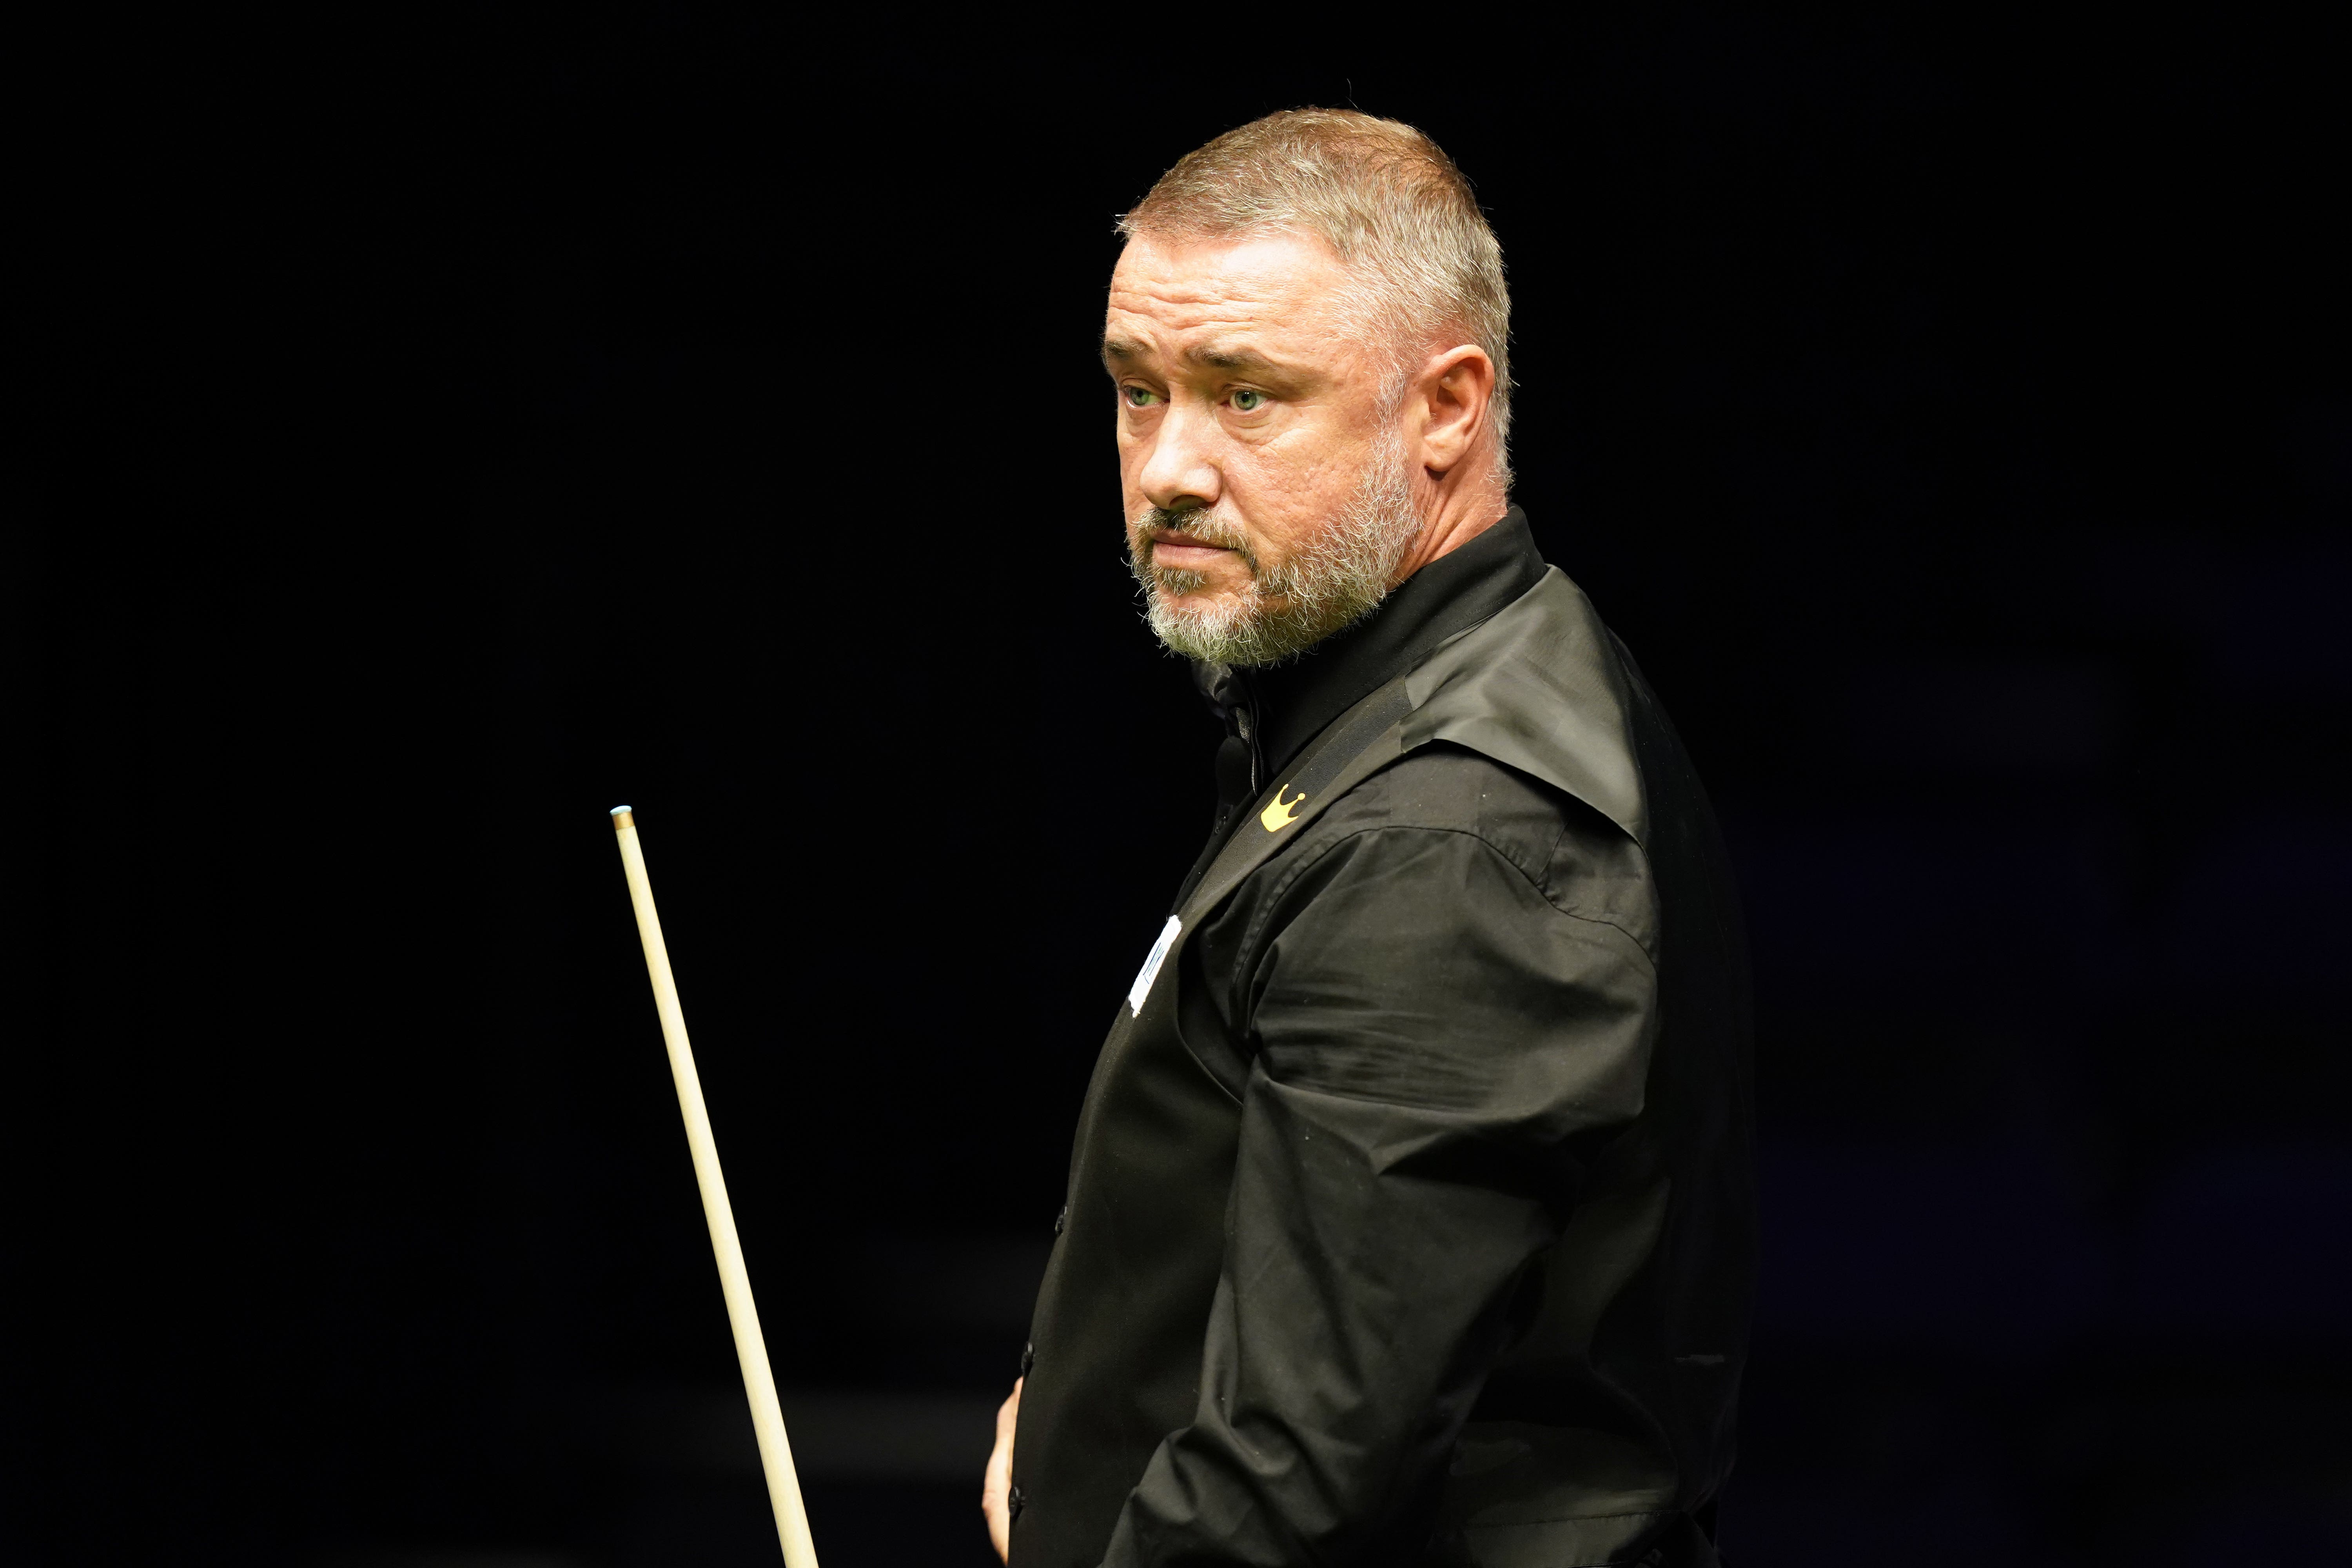 Stephen Hendry has declined a two-year tour card from World Snooker (Mike Egerton/PA)